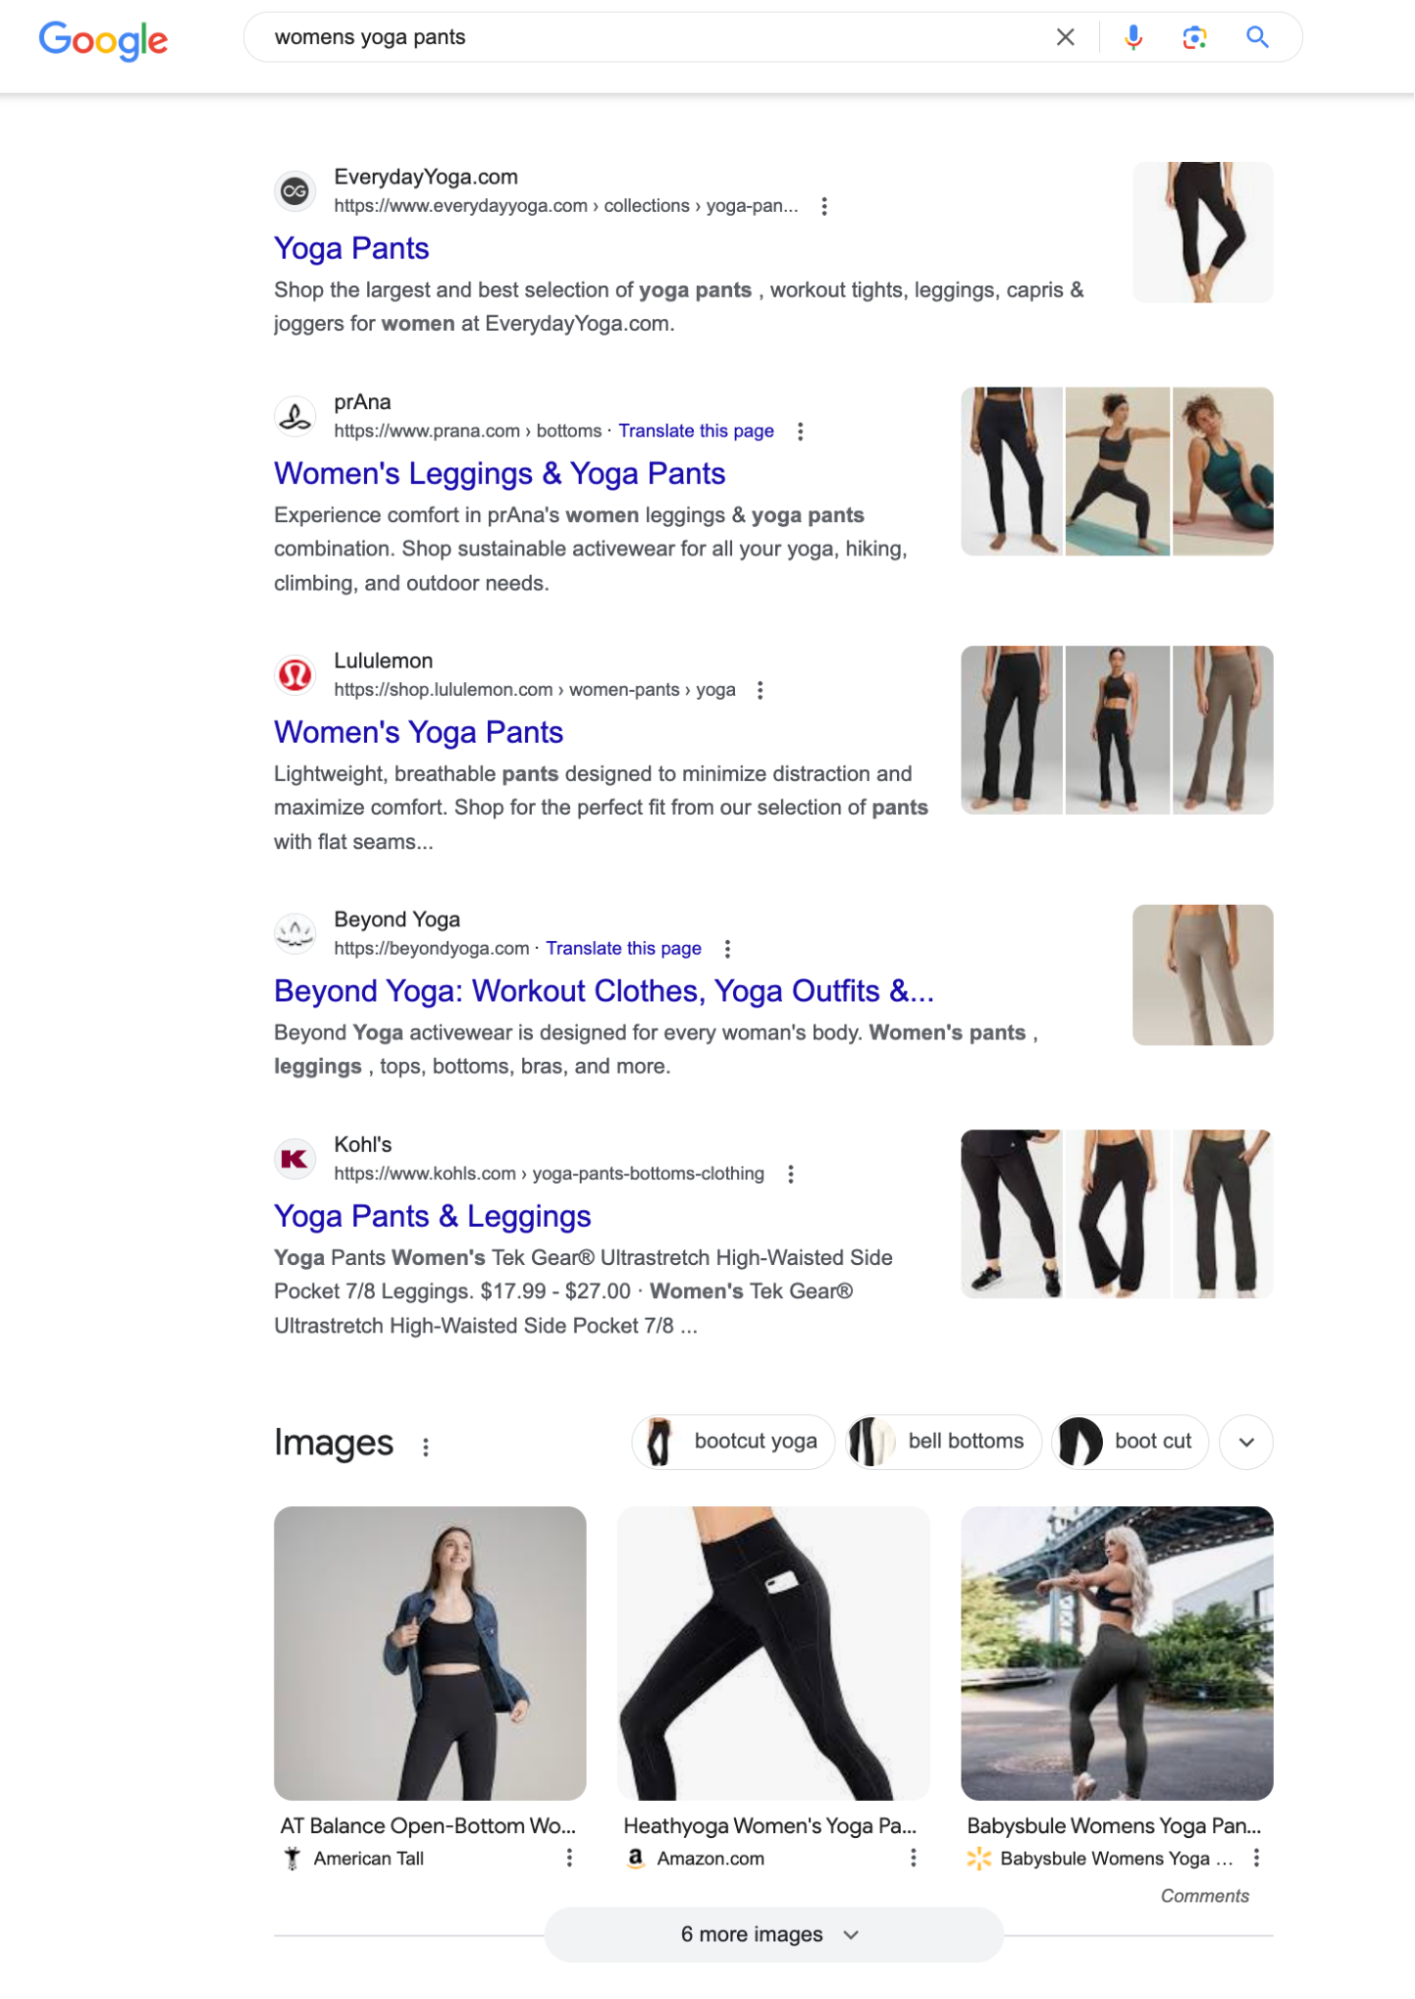 Image of SERP for keyword “women’s yoga pants” with organic listings for Everyday Yoga, prAna, Lululemon, and other brands.